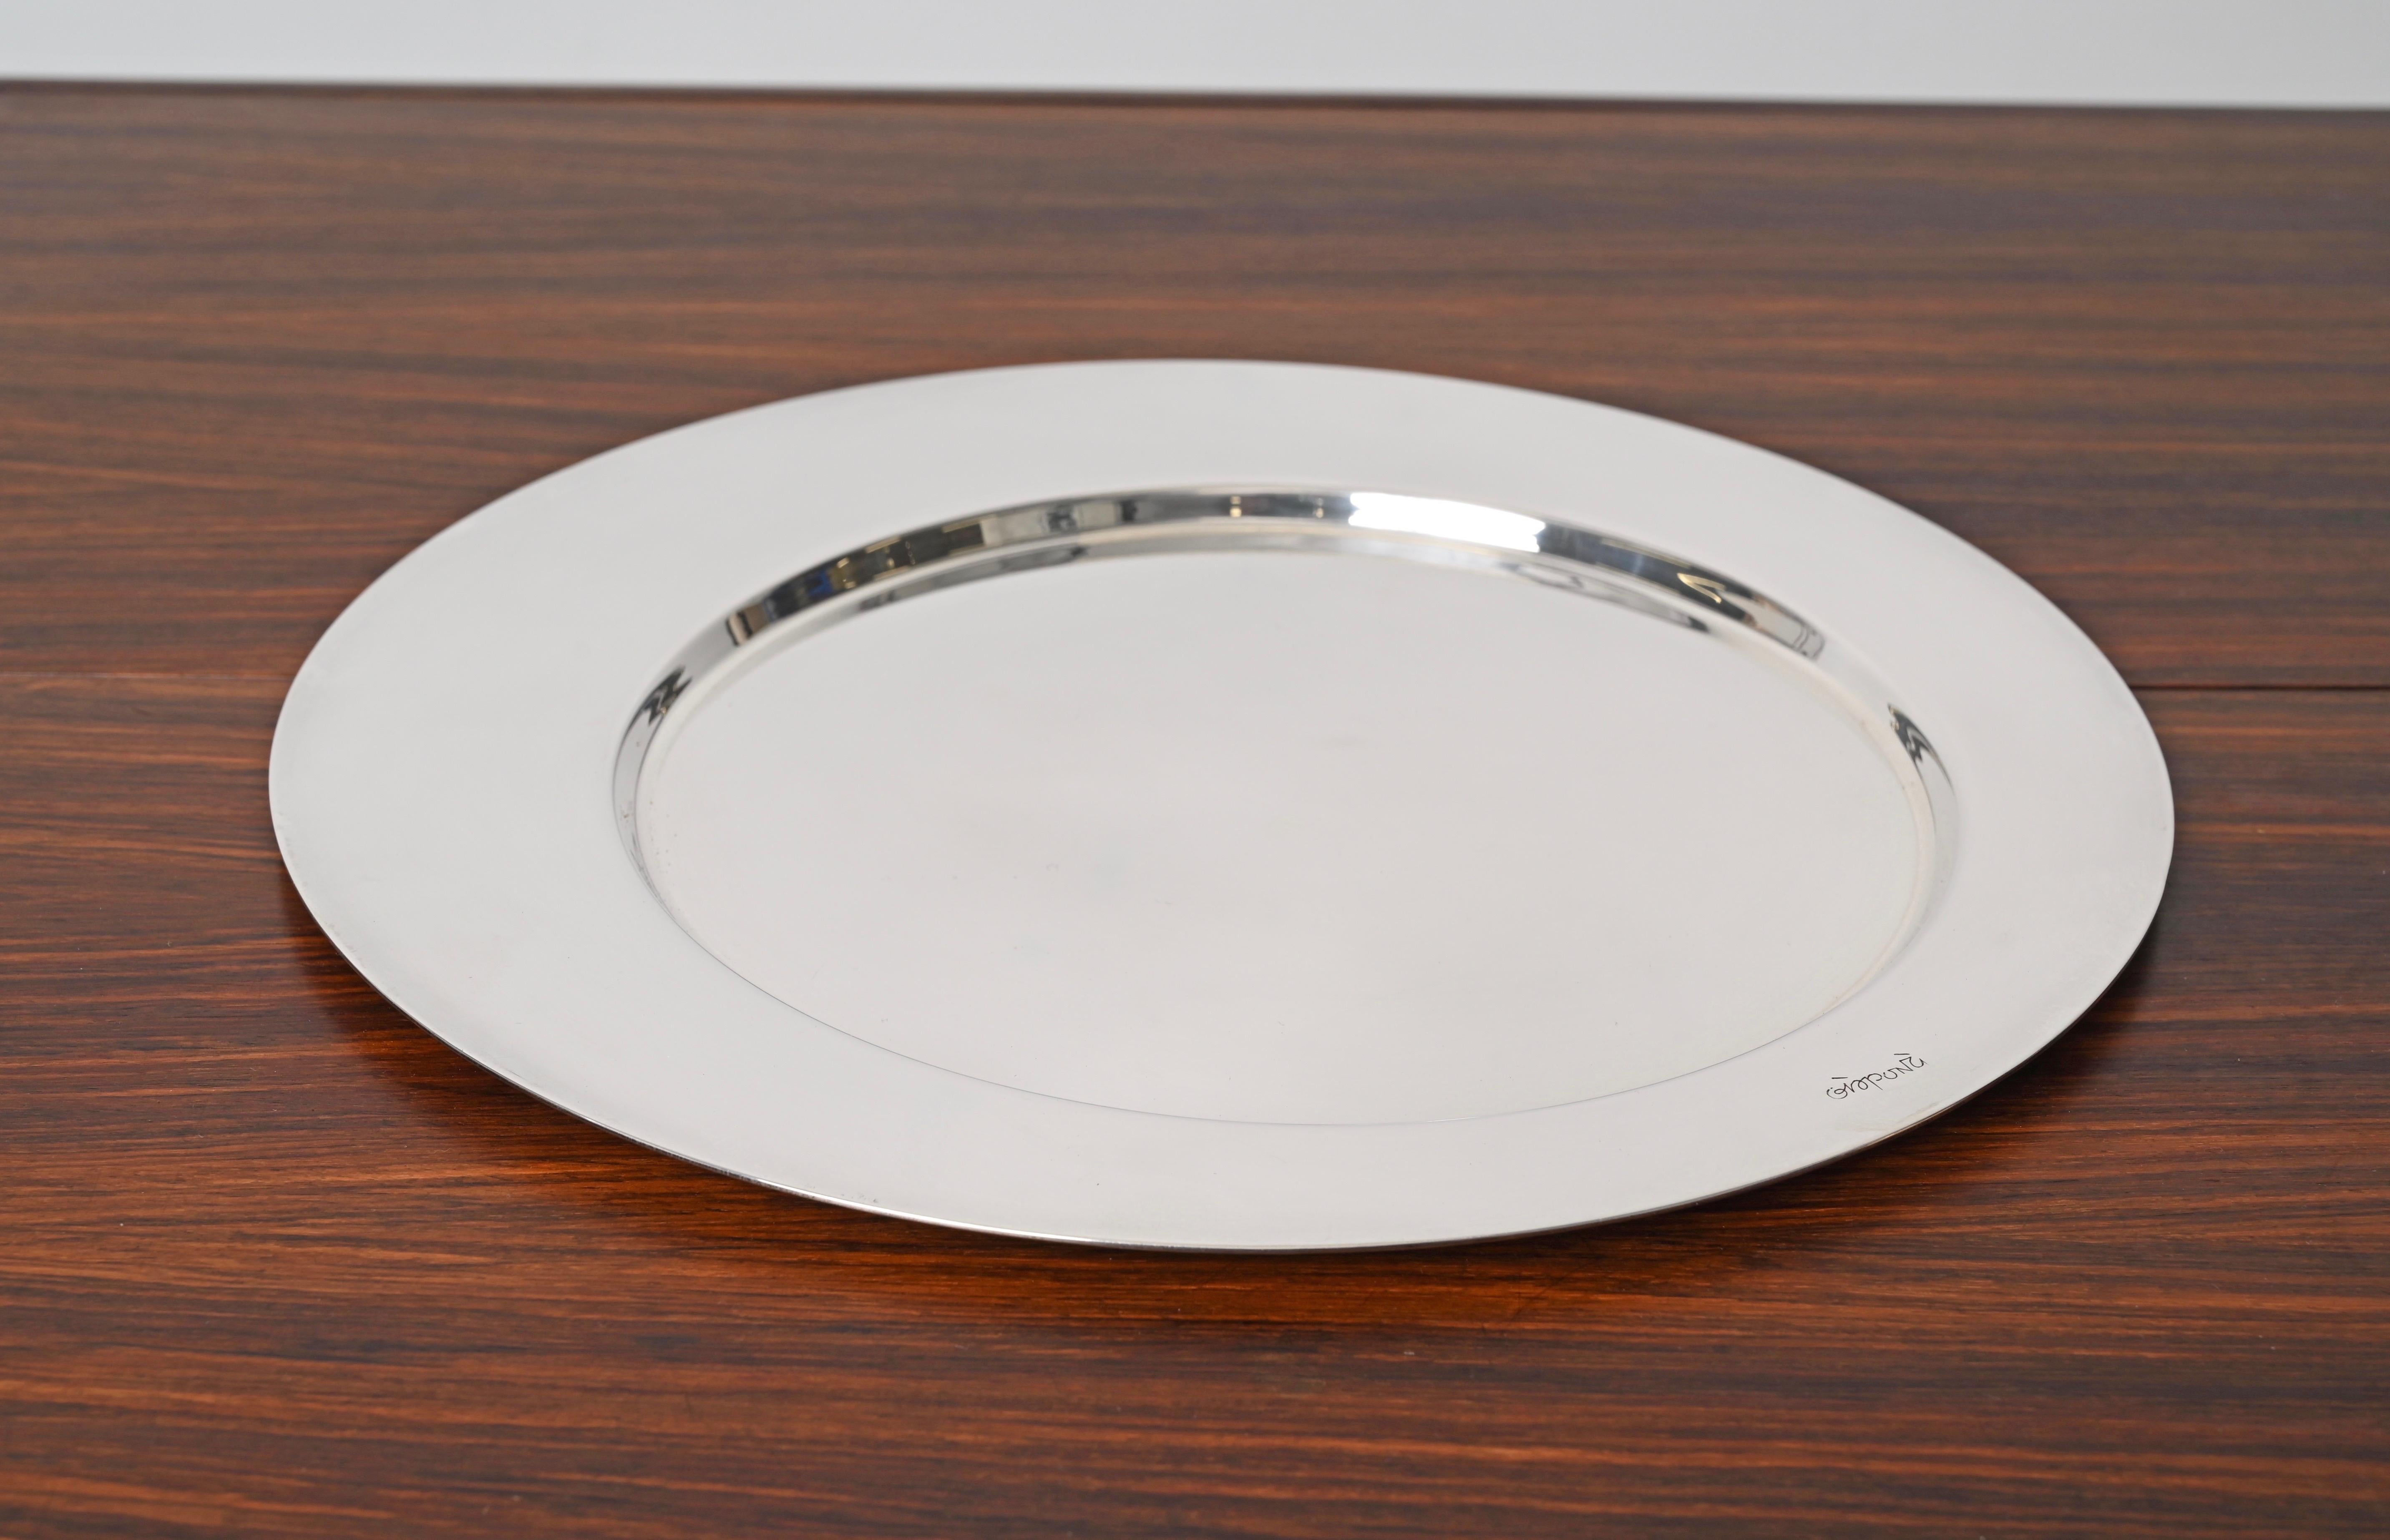 Gio Ponti for Cleto Munari Modernist Silver Plated Serving Plate Italy, 1980s For Sale 4